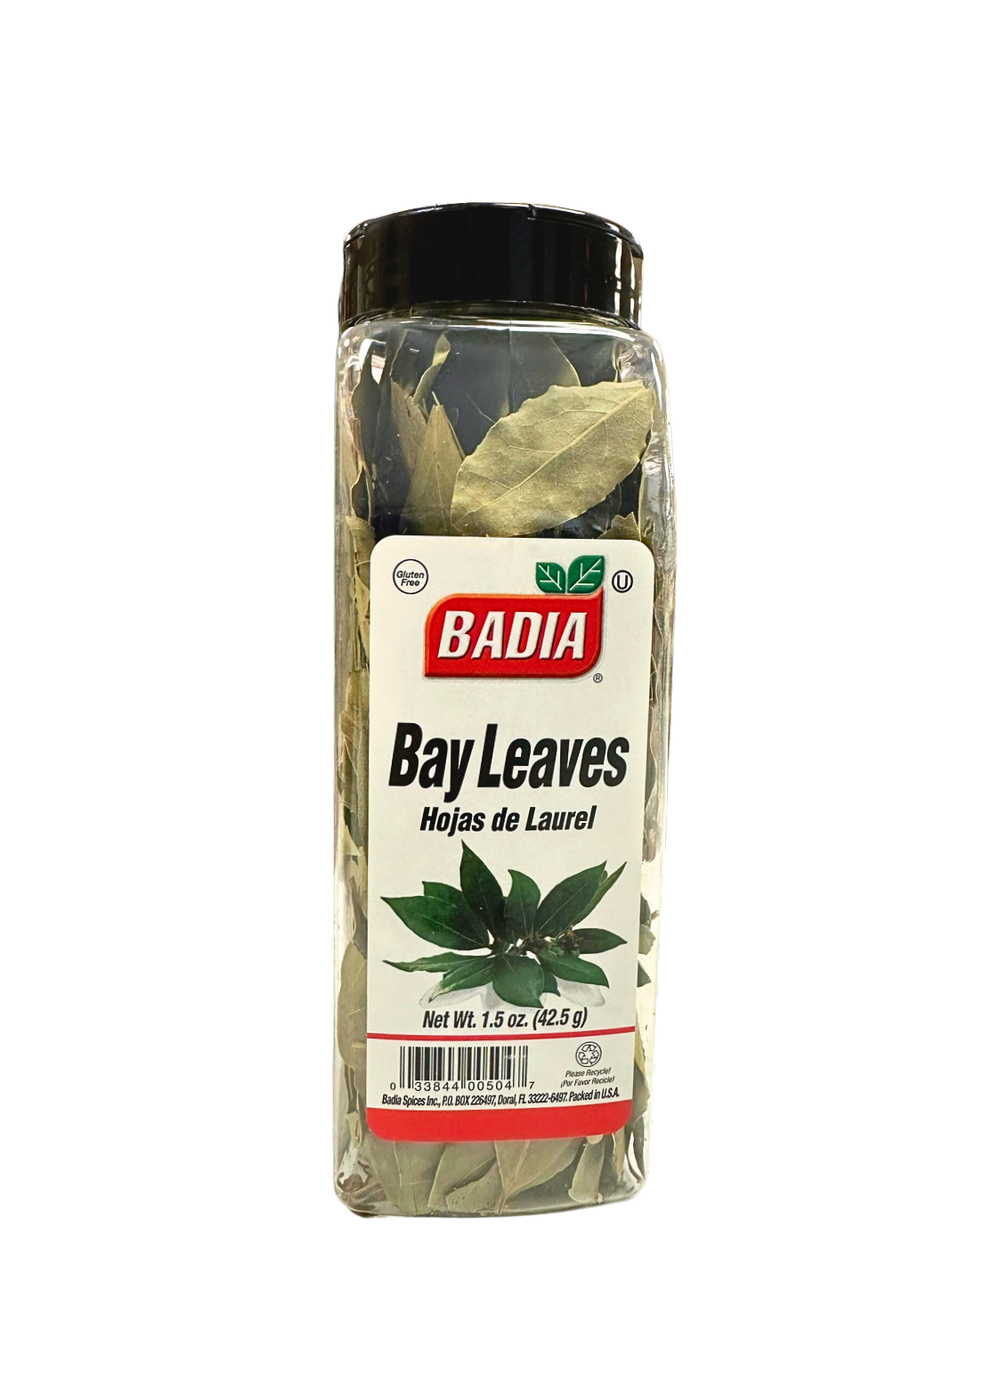 Bay Leaves Whole - Country Life Natural Foods